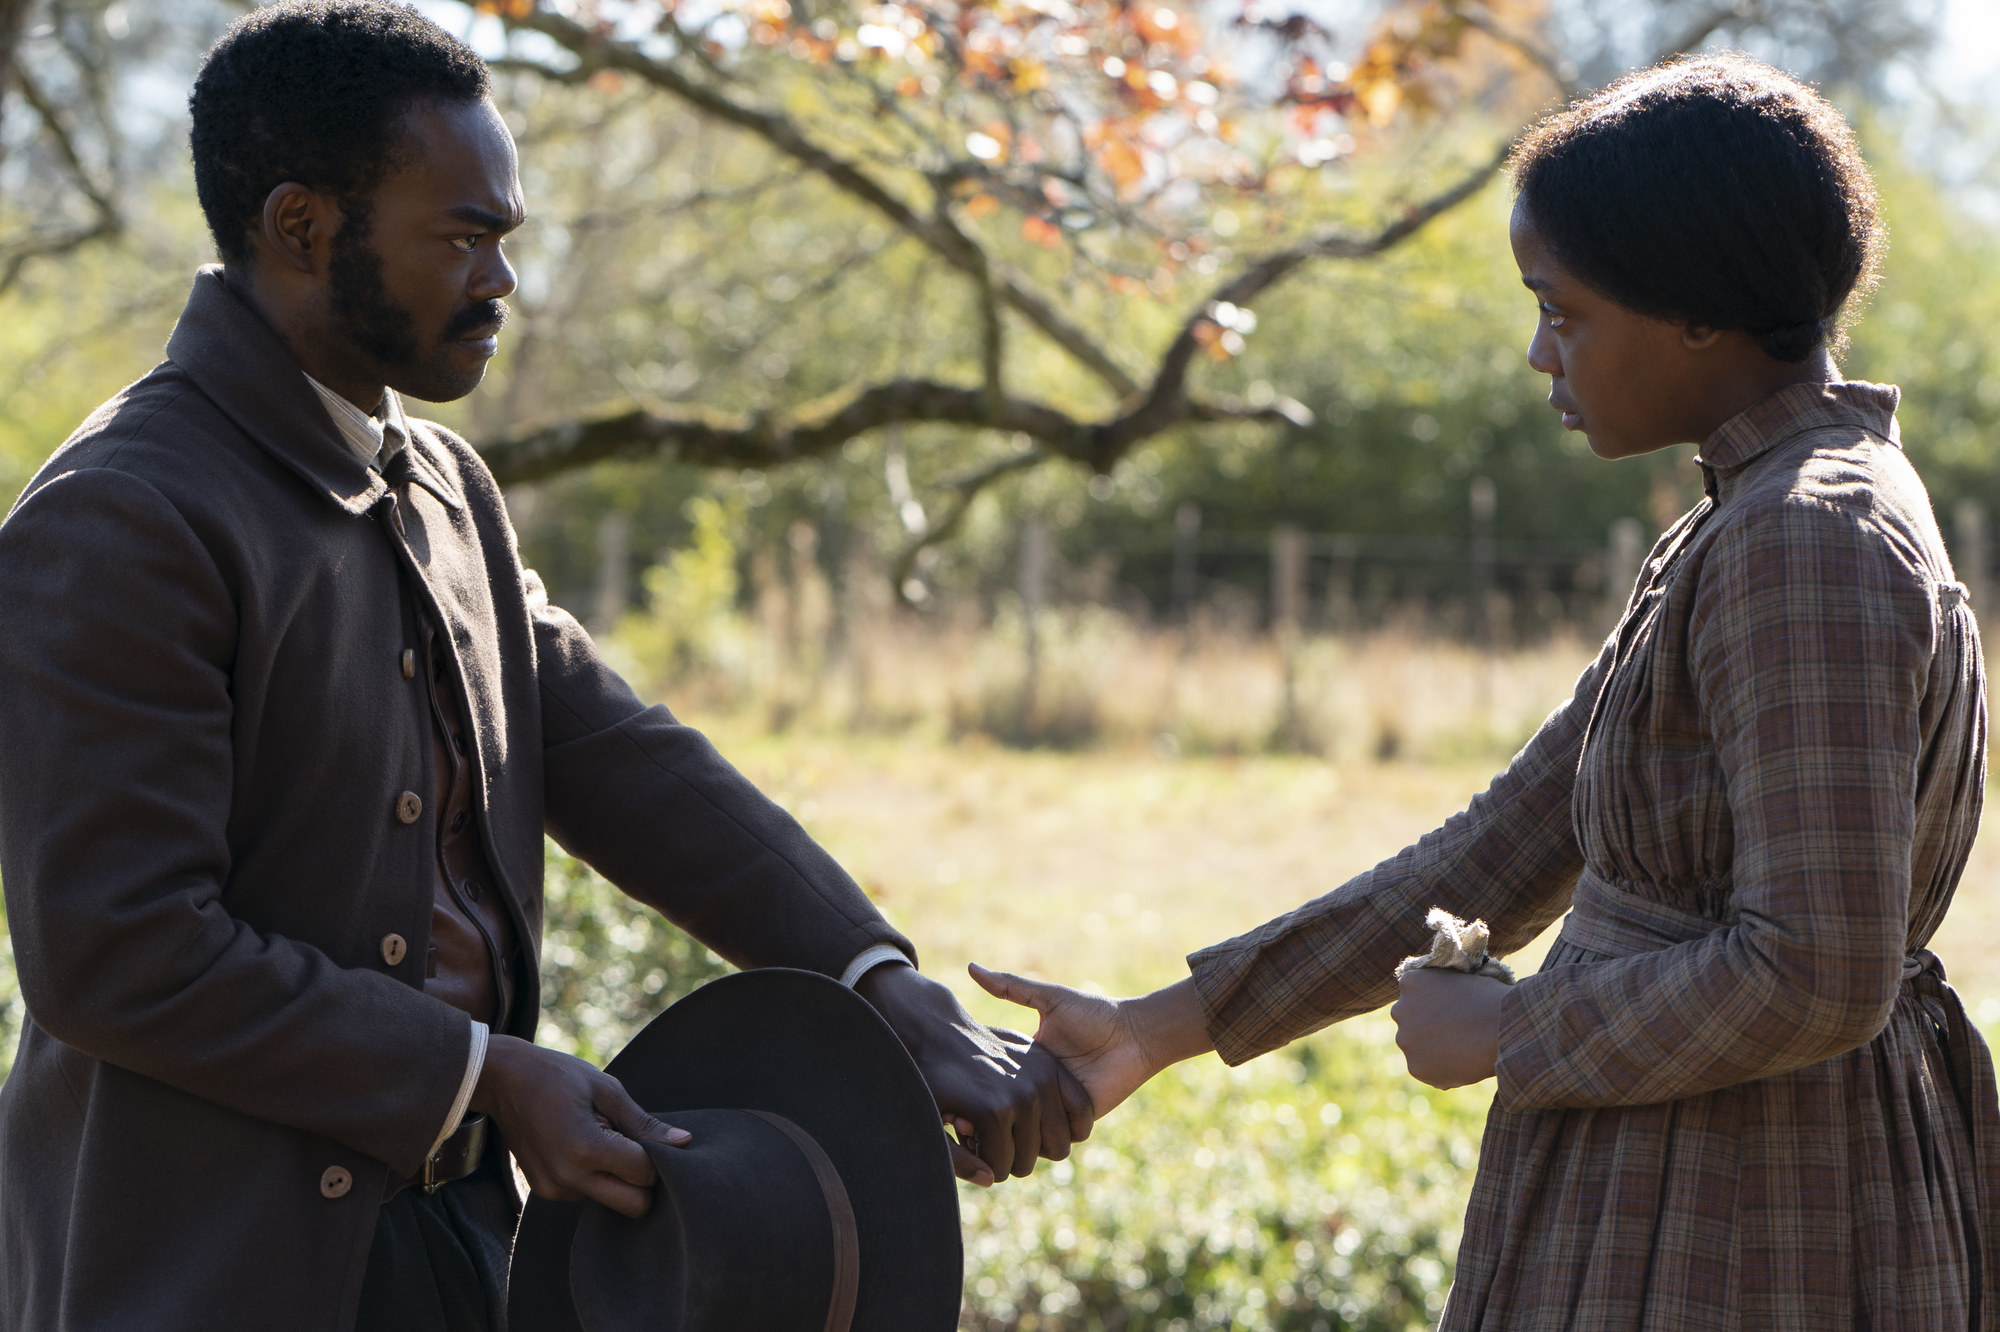 William Jackson Harper as Royal holding hands with Thuso Mbedu as Cora Randall